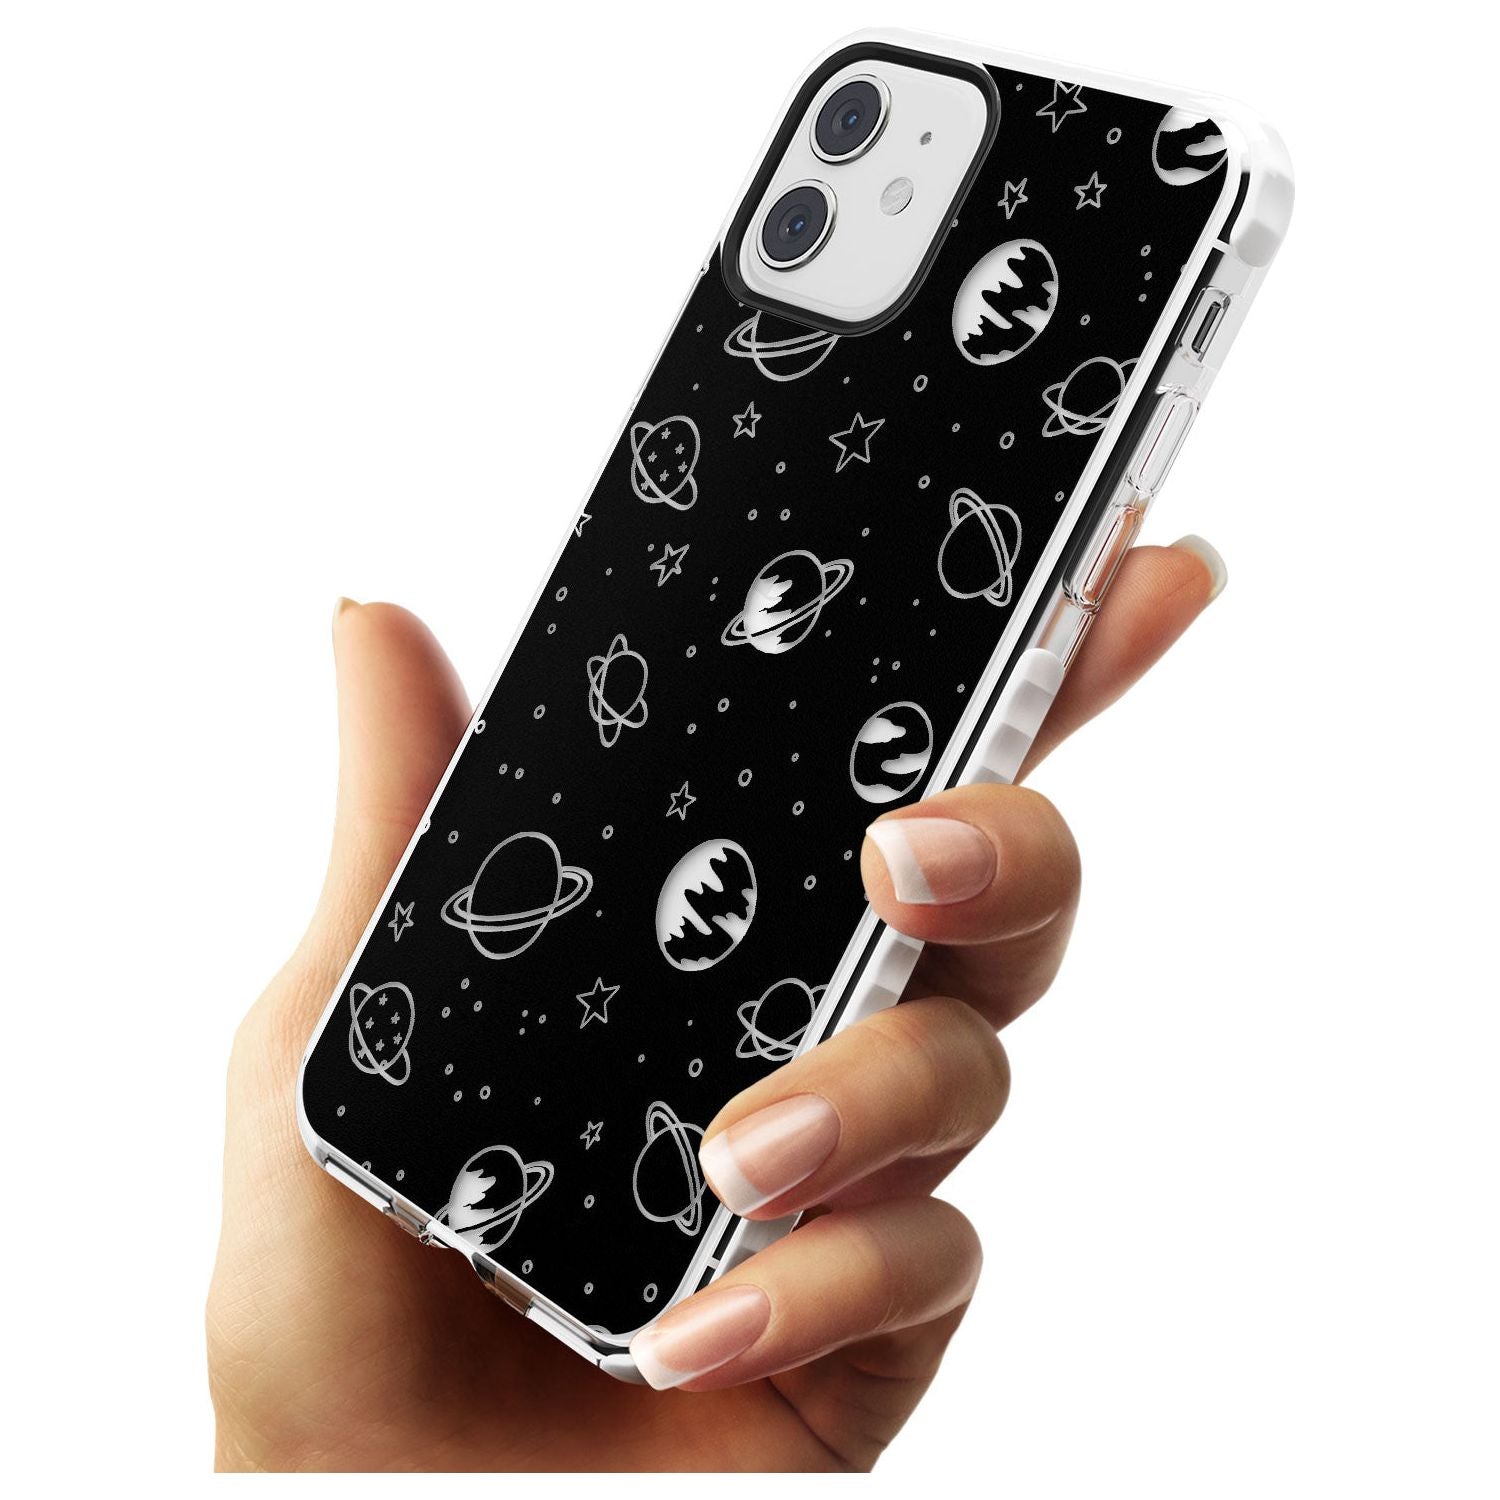 Outer Space Outlines: Clear on Black Slim TPU Phone Case for iPhone 11